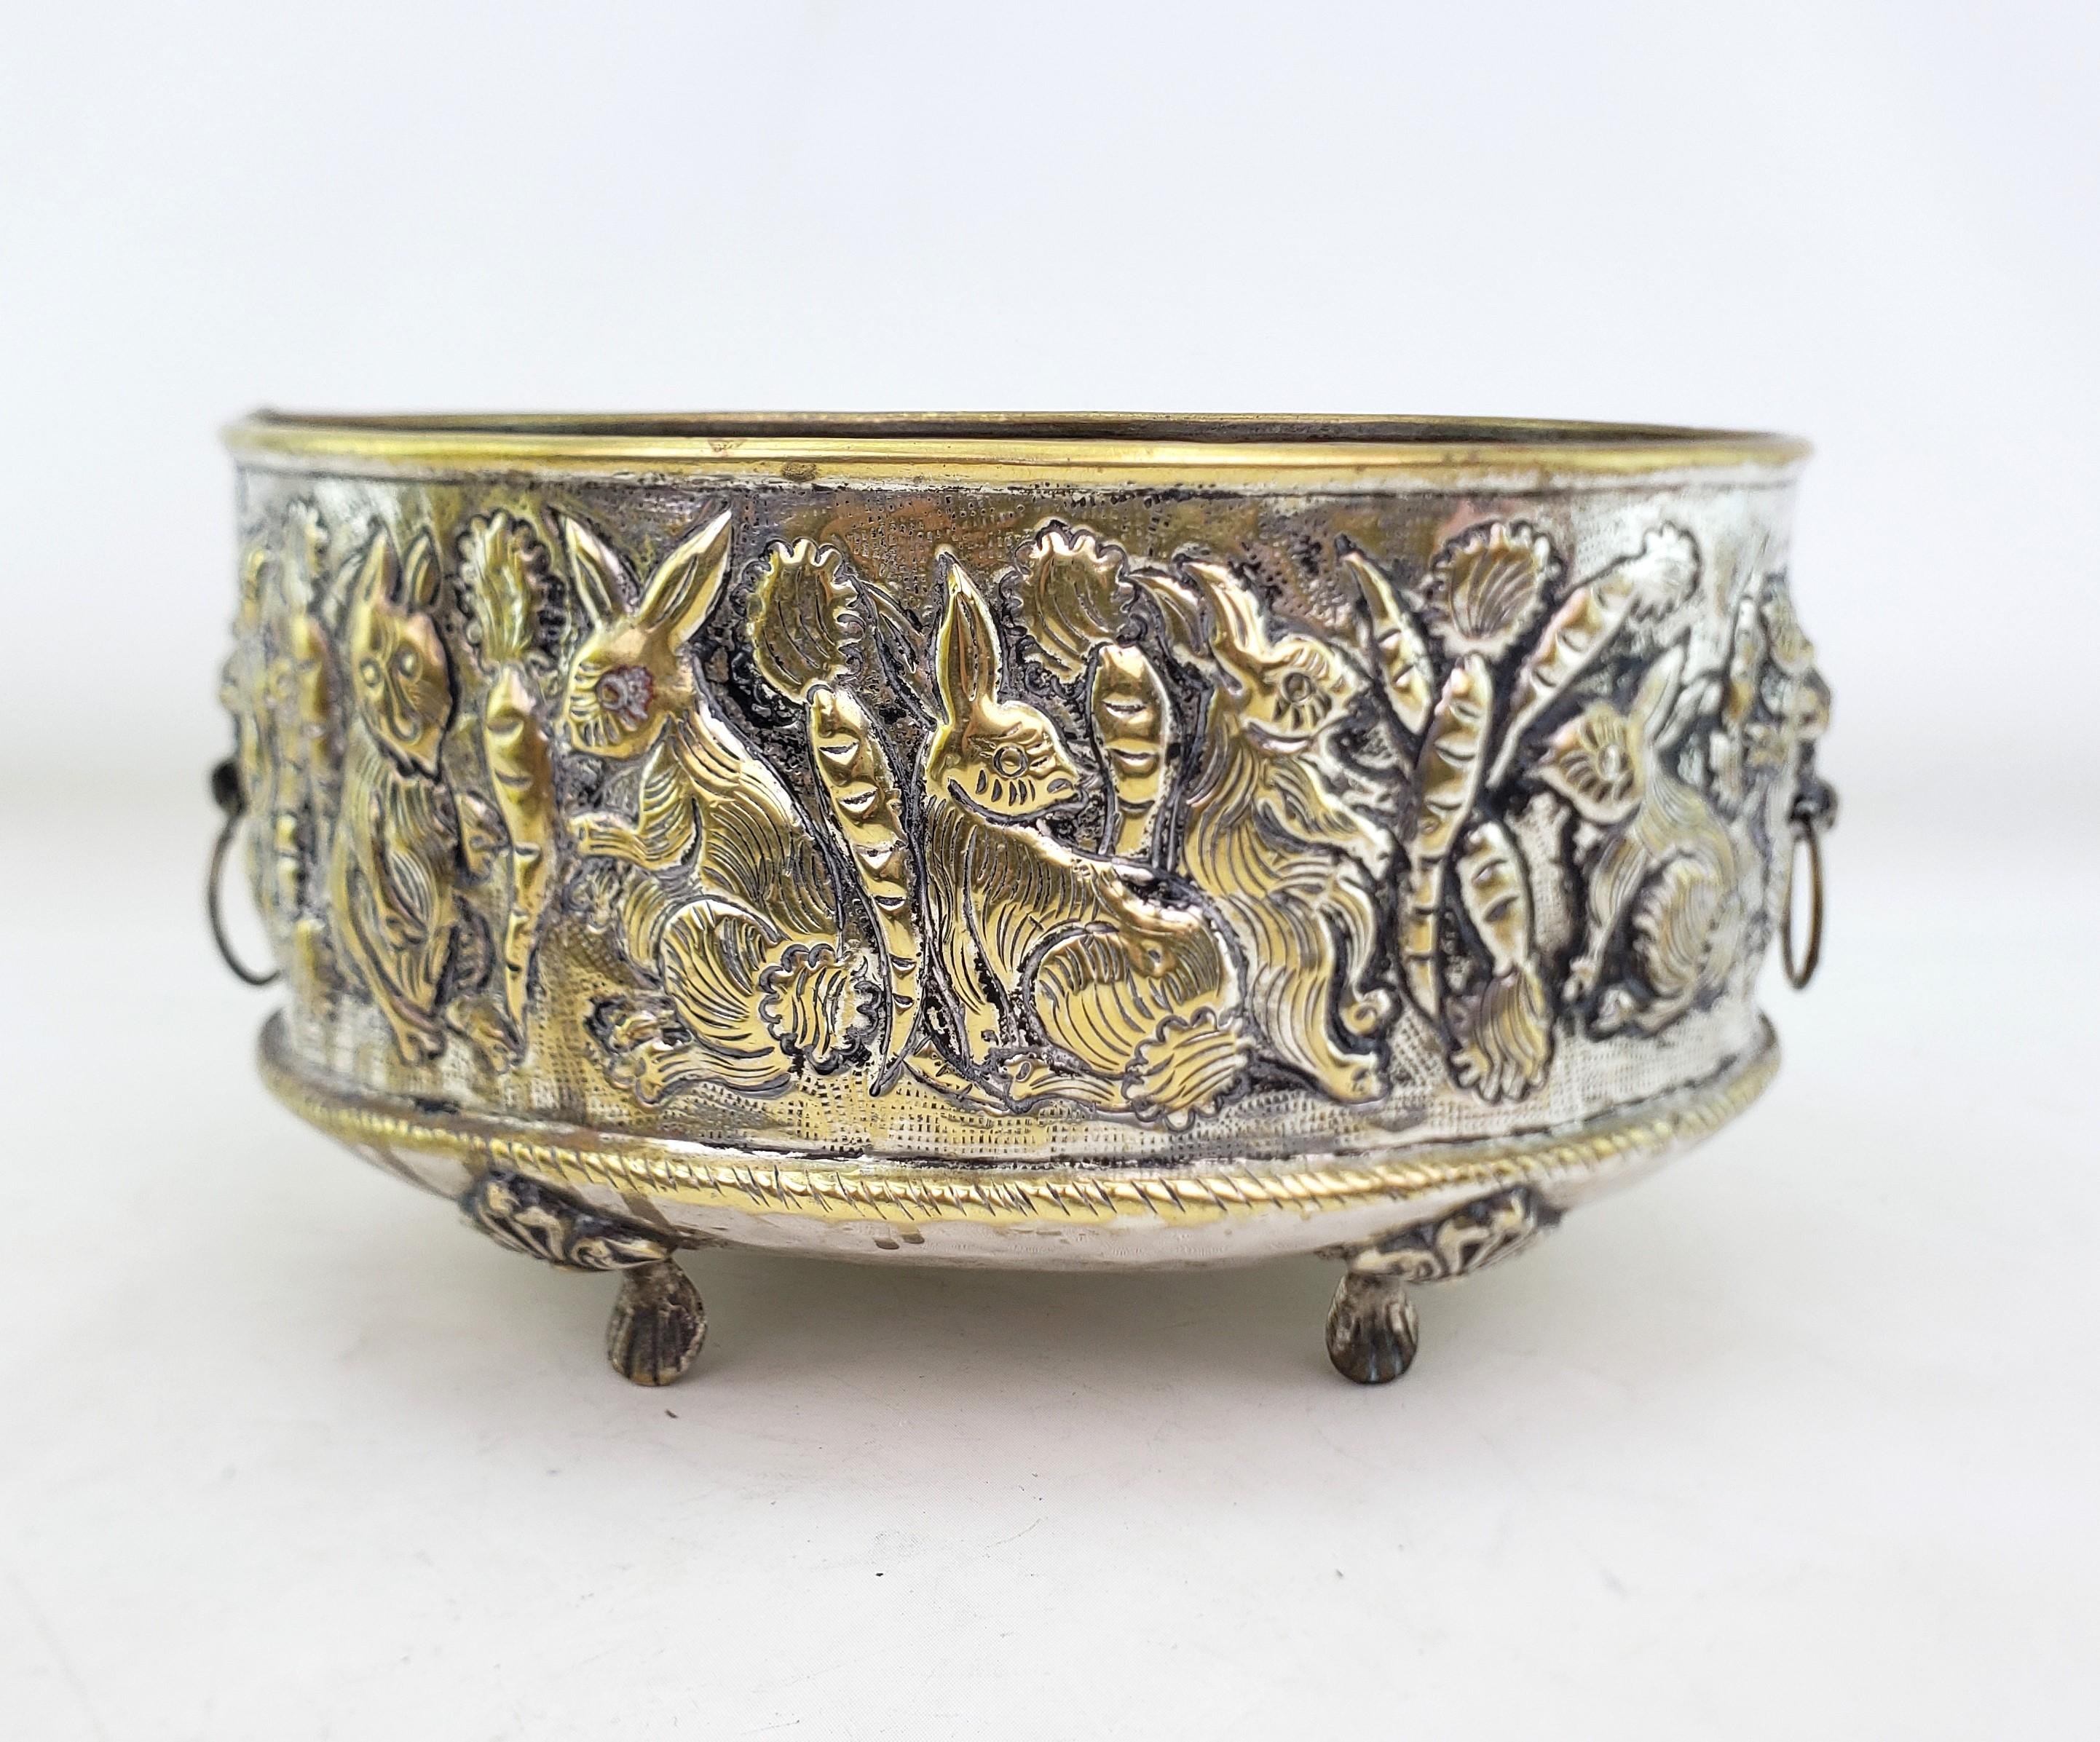 Antique English Hand-Crafted Plated Brass Planter with Whimsical Rabbits For Sale 2